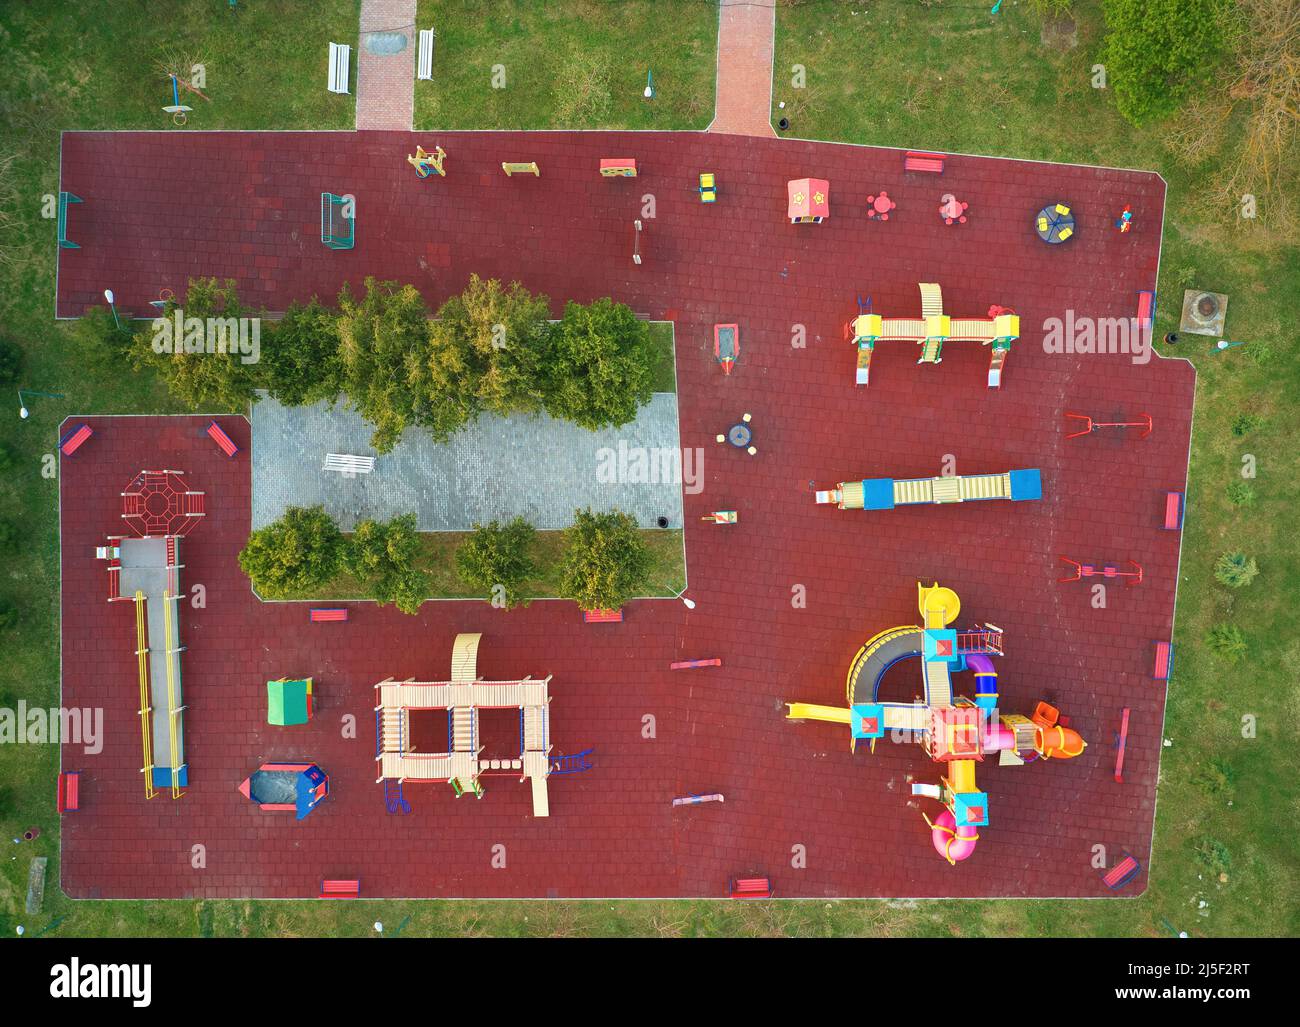 Aerial view of playgrounds in garden. Element of design. Stock Photo